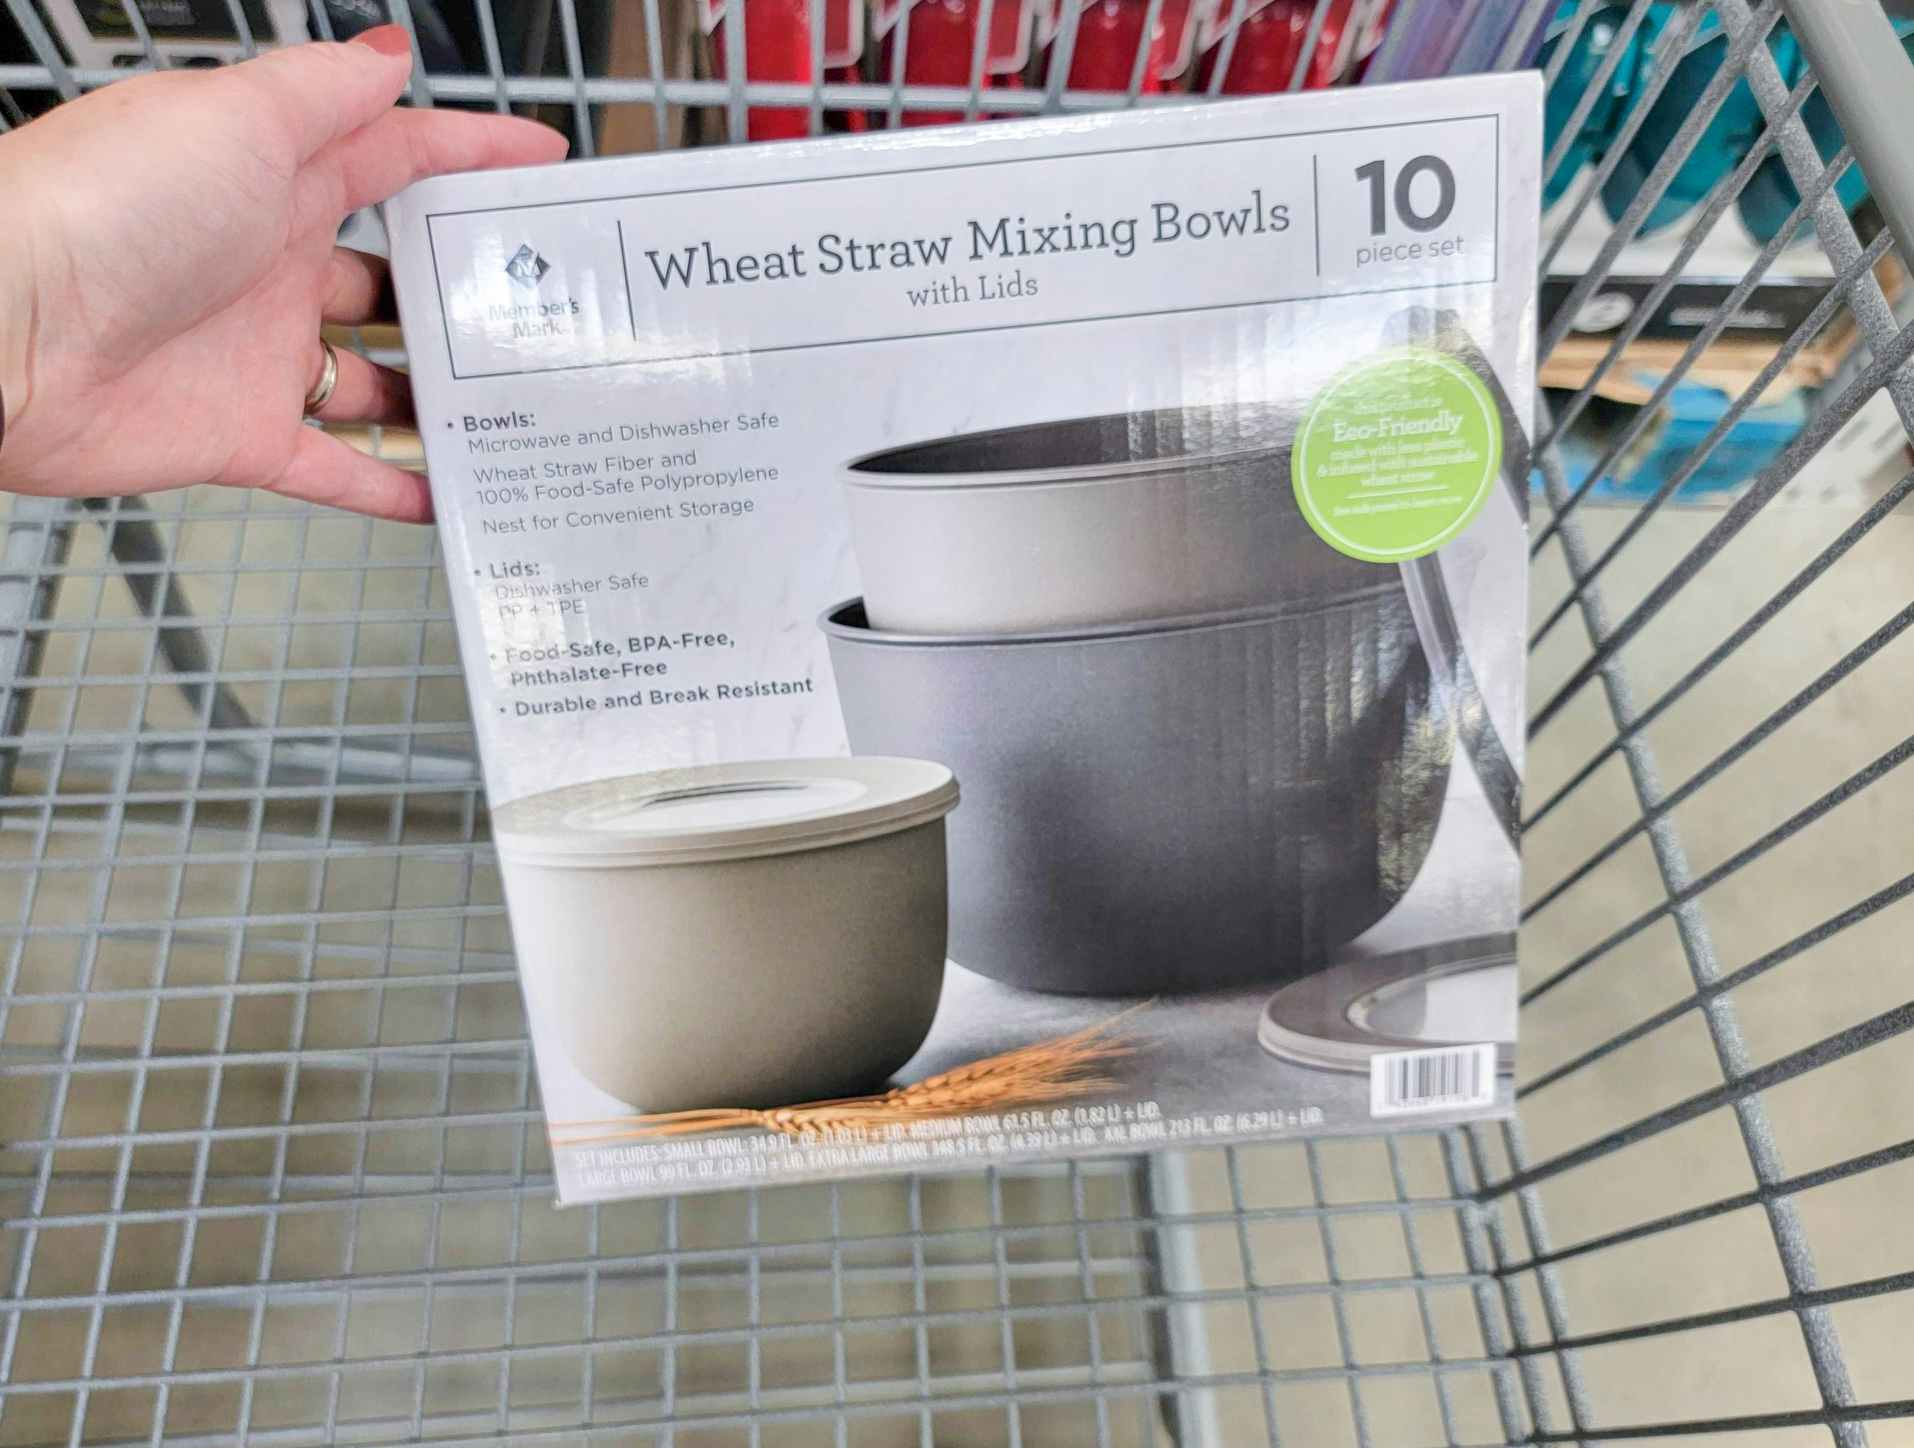 a set of grey mixing bowls in a cart